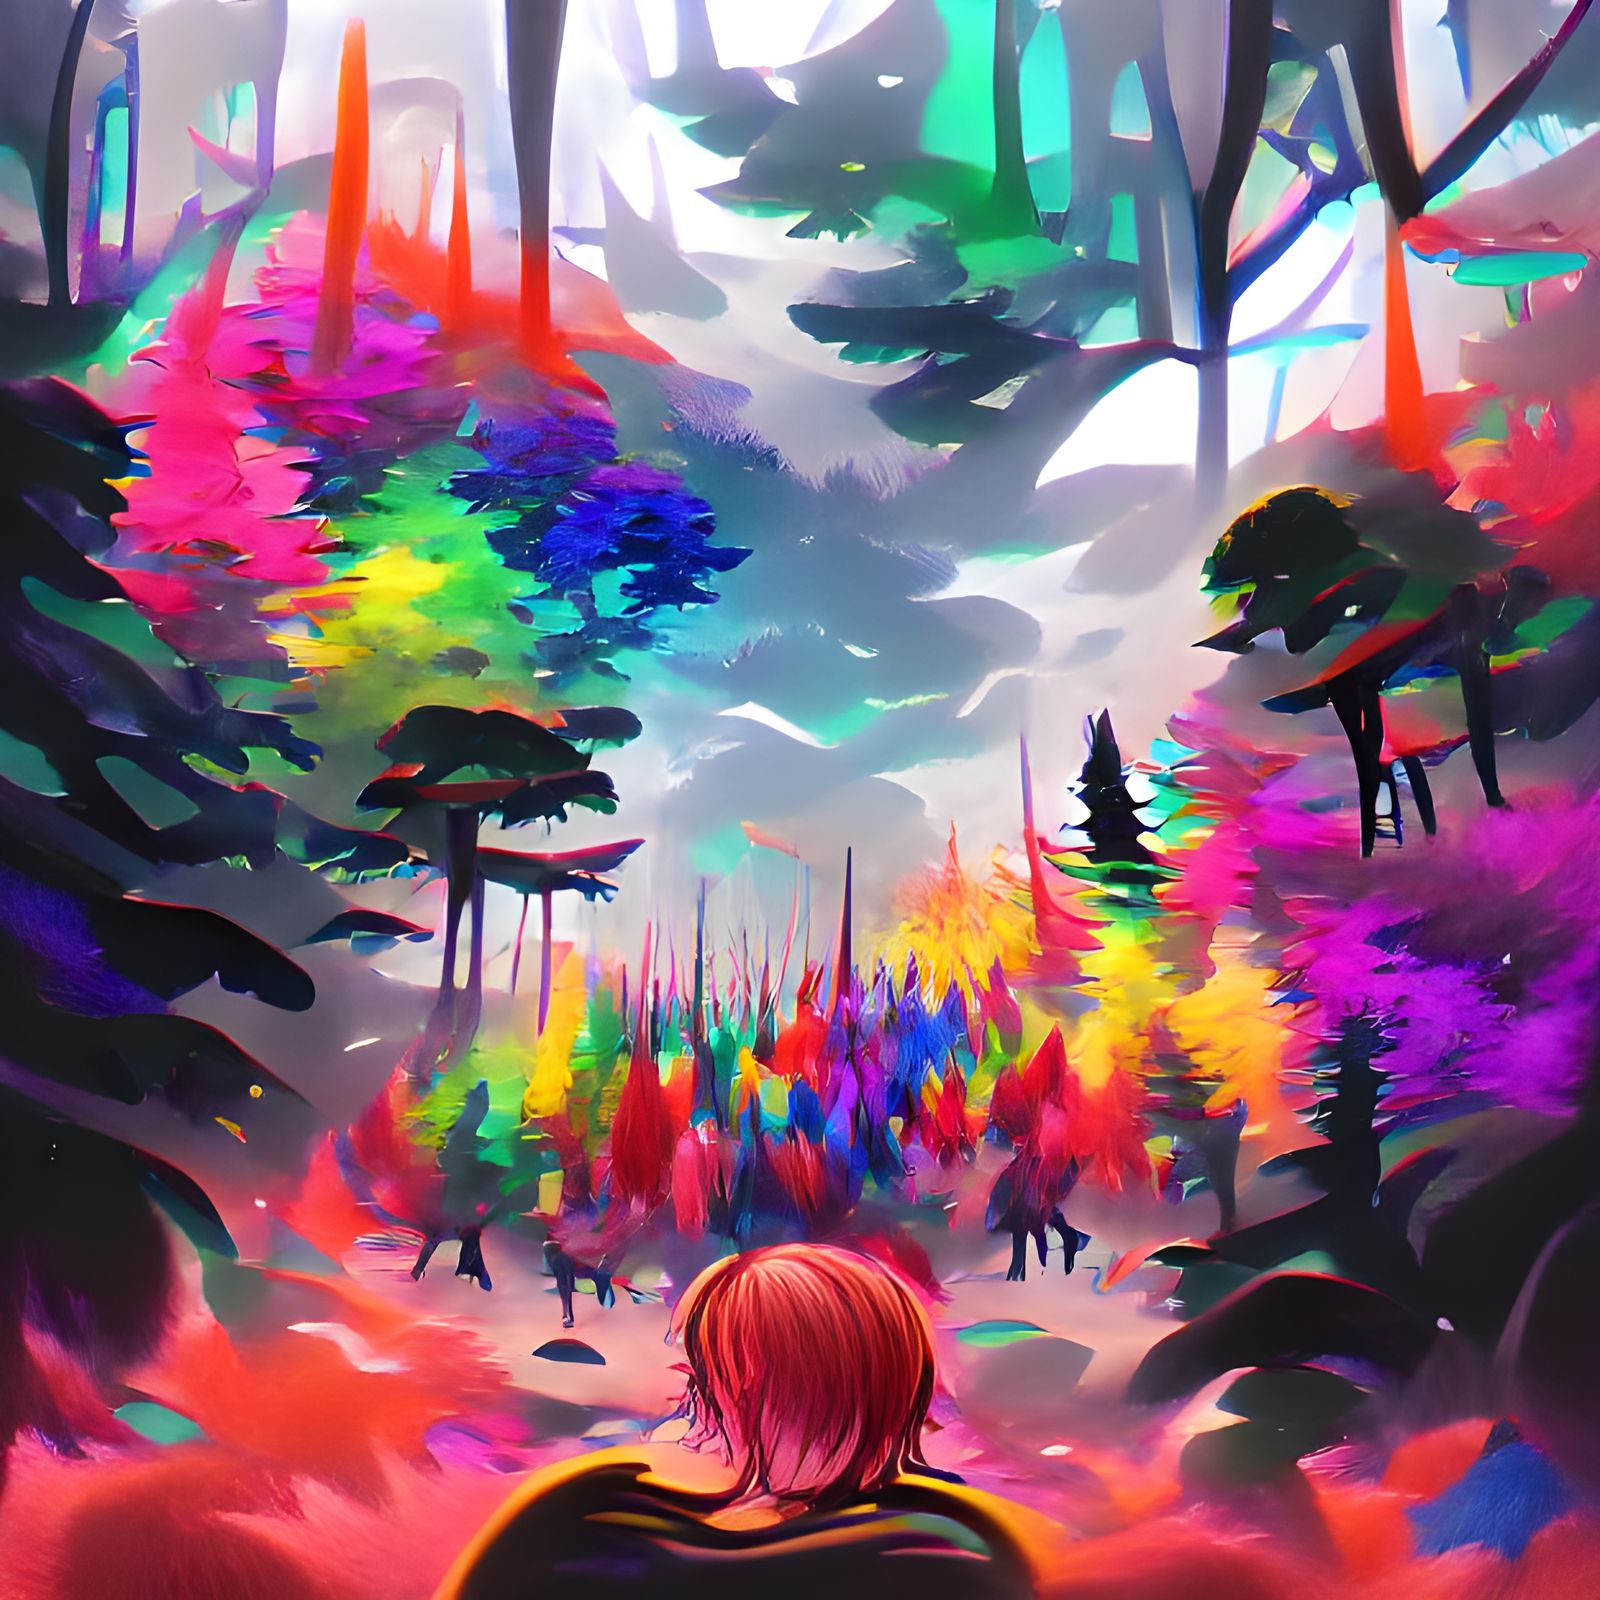 Lost in a forest of colors